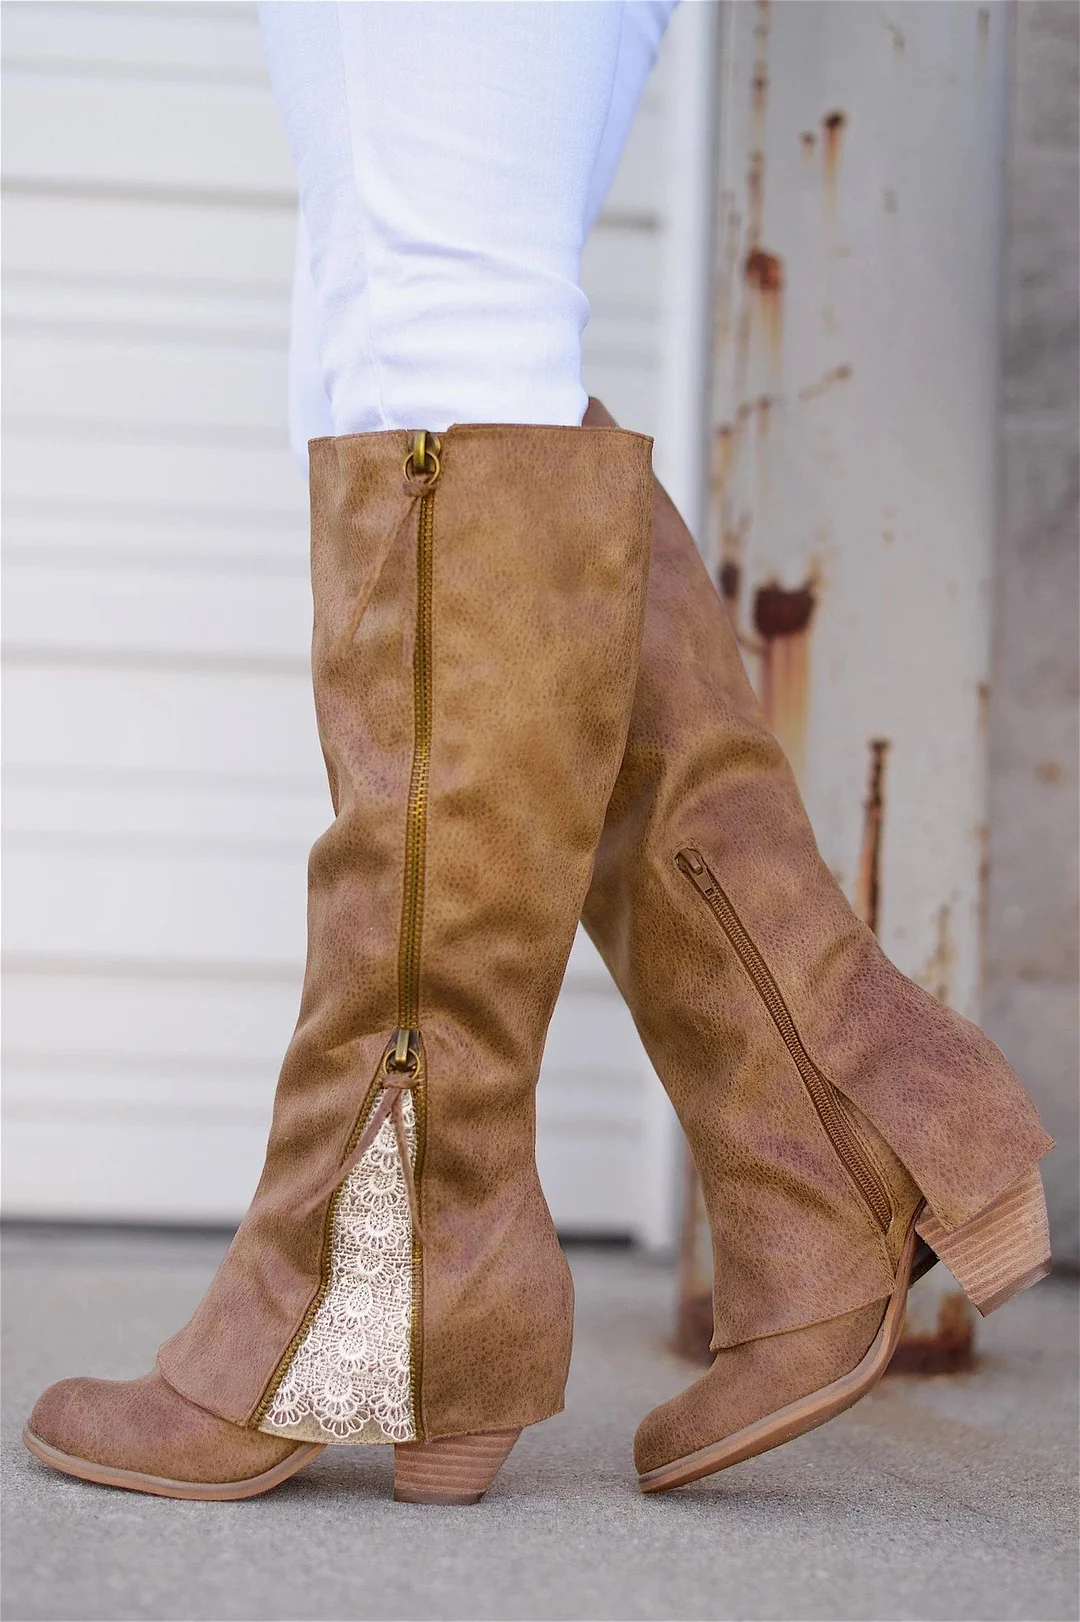 Winter Over Knee Boots Lace Chunky Heel Boots | IFYHOME